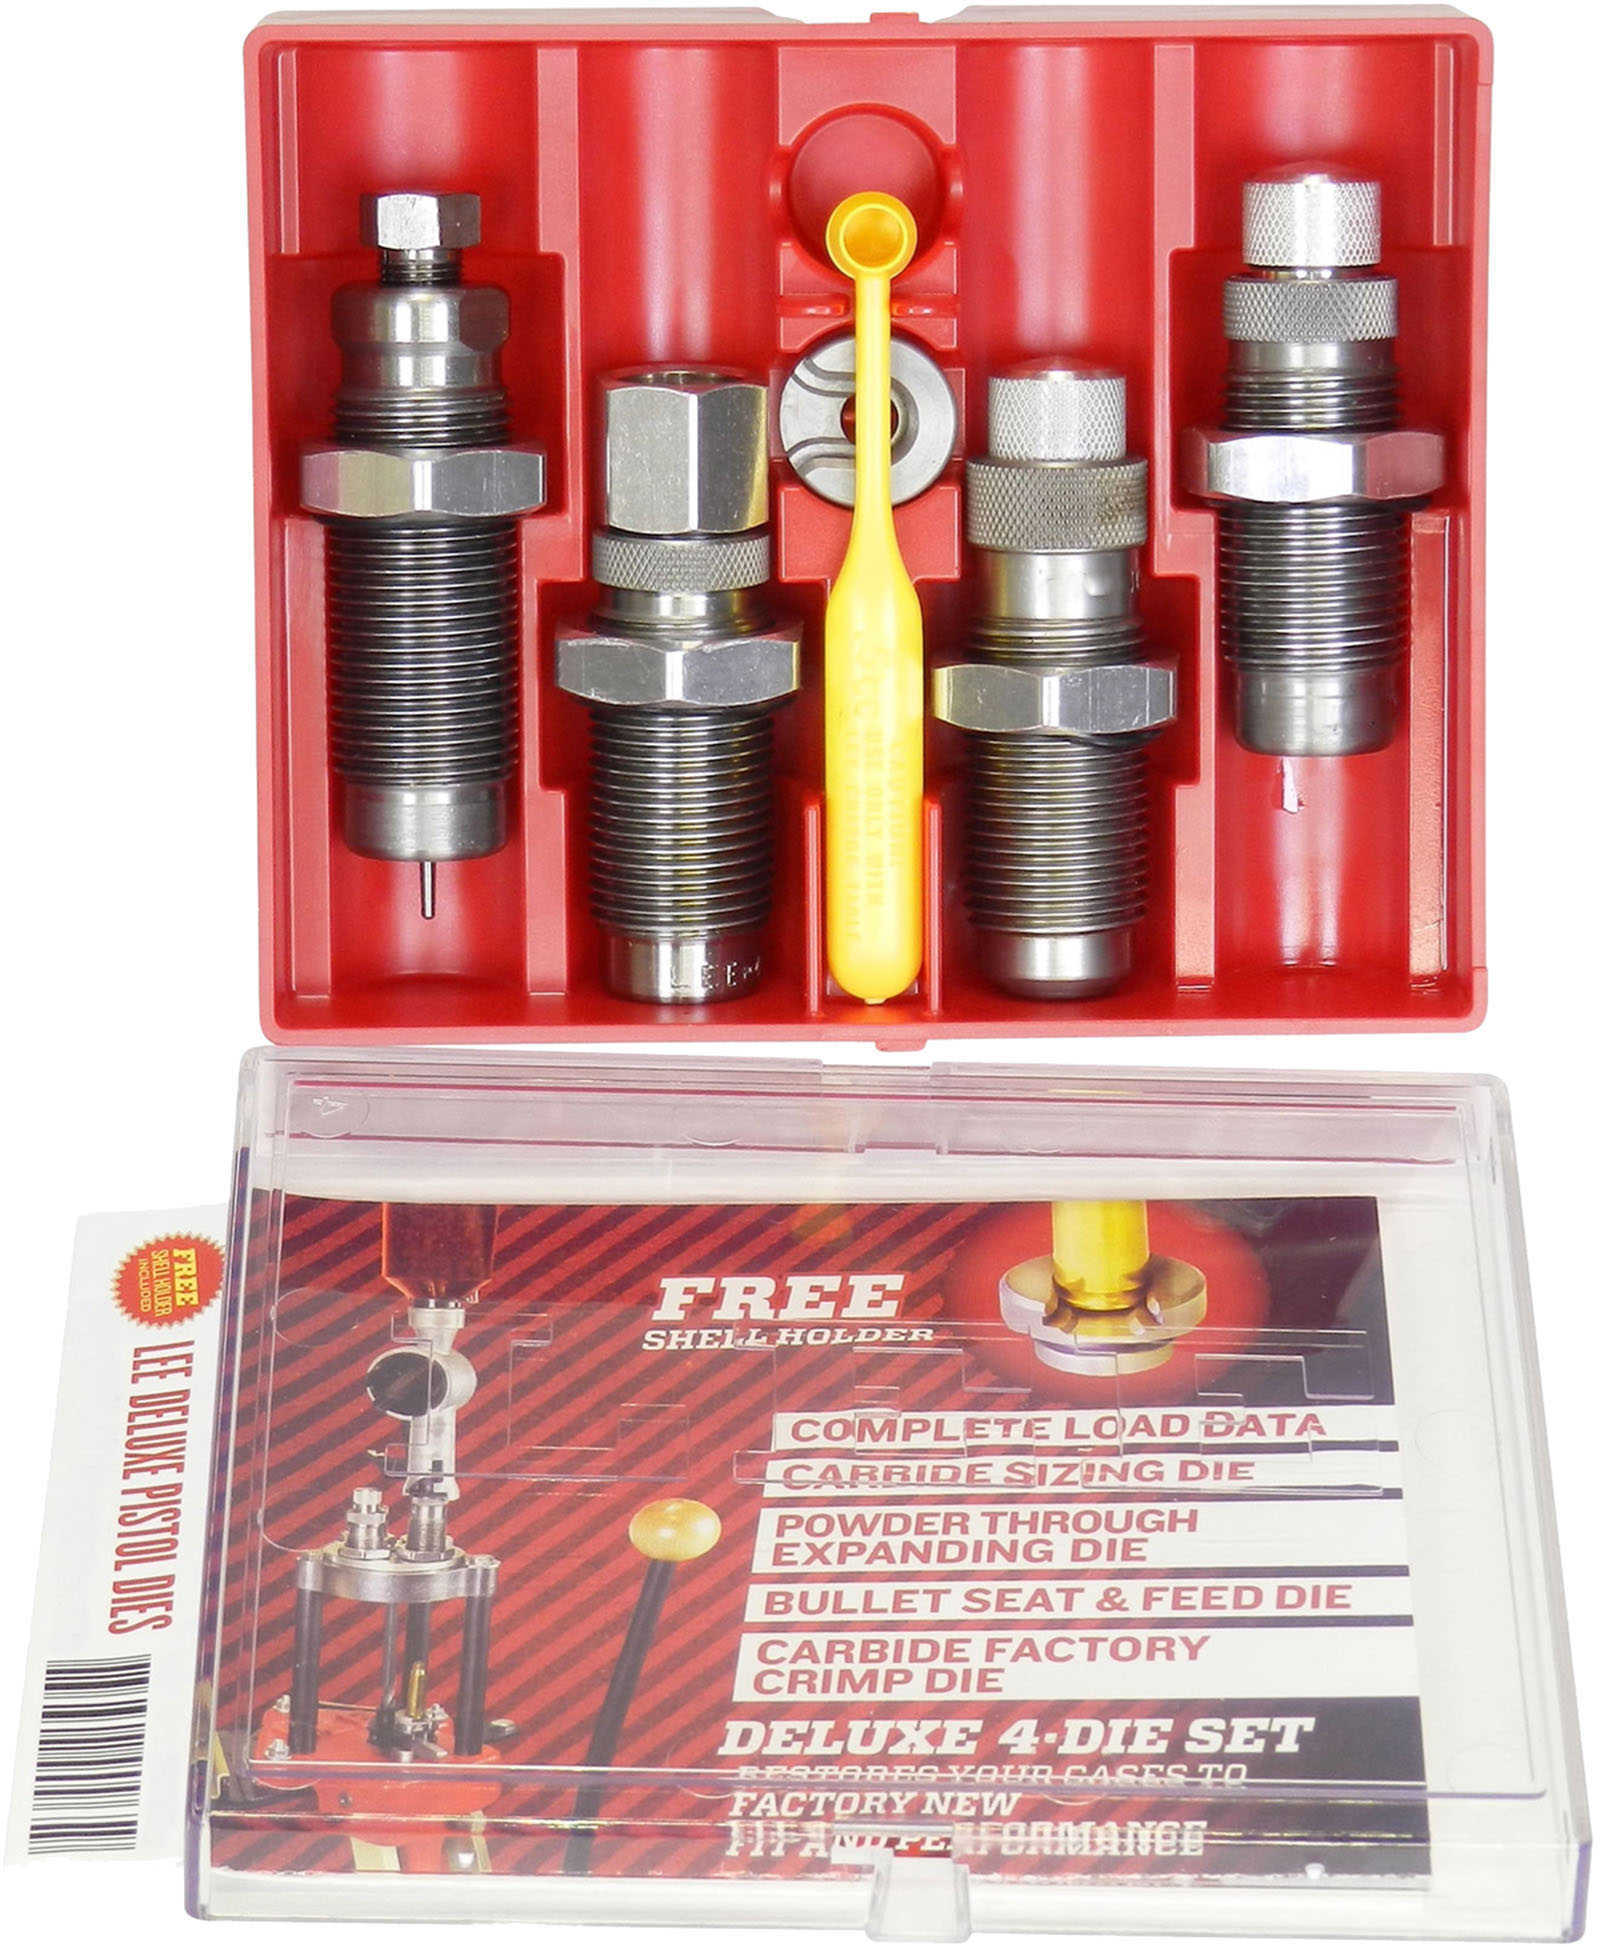 Lee Deluxe Pistol Carbide 4-Die Set With Shellholder For 45 ACP Md: 90968